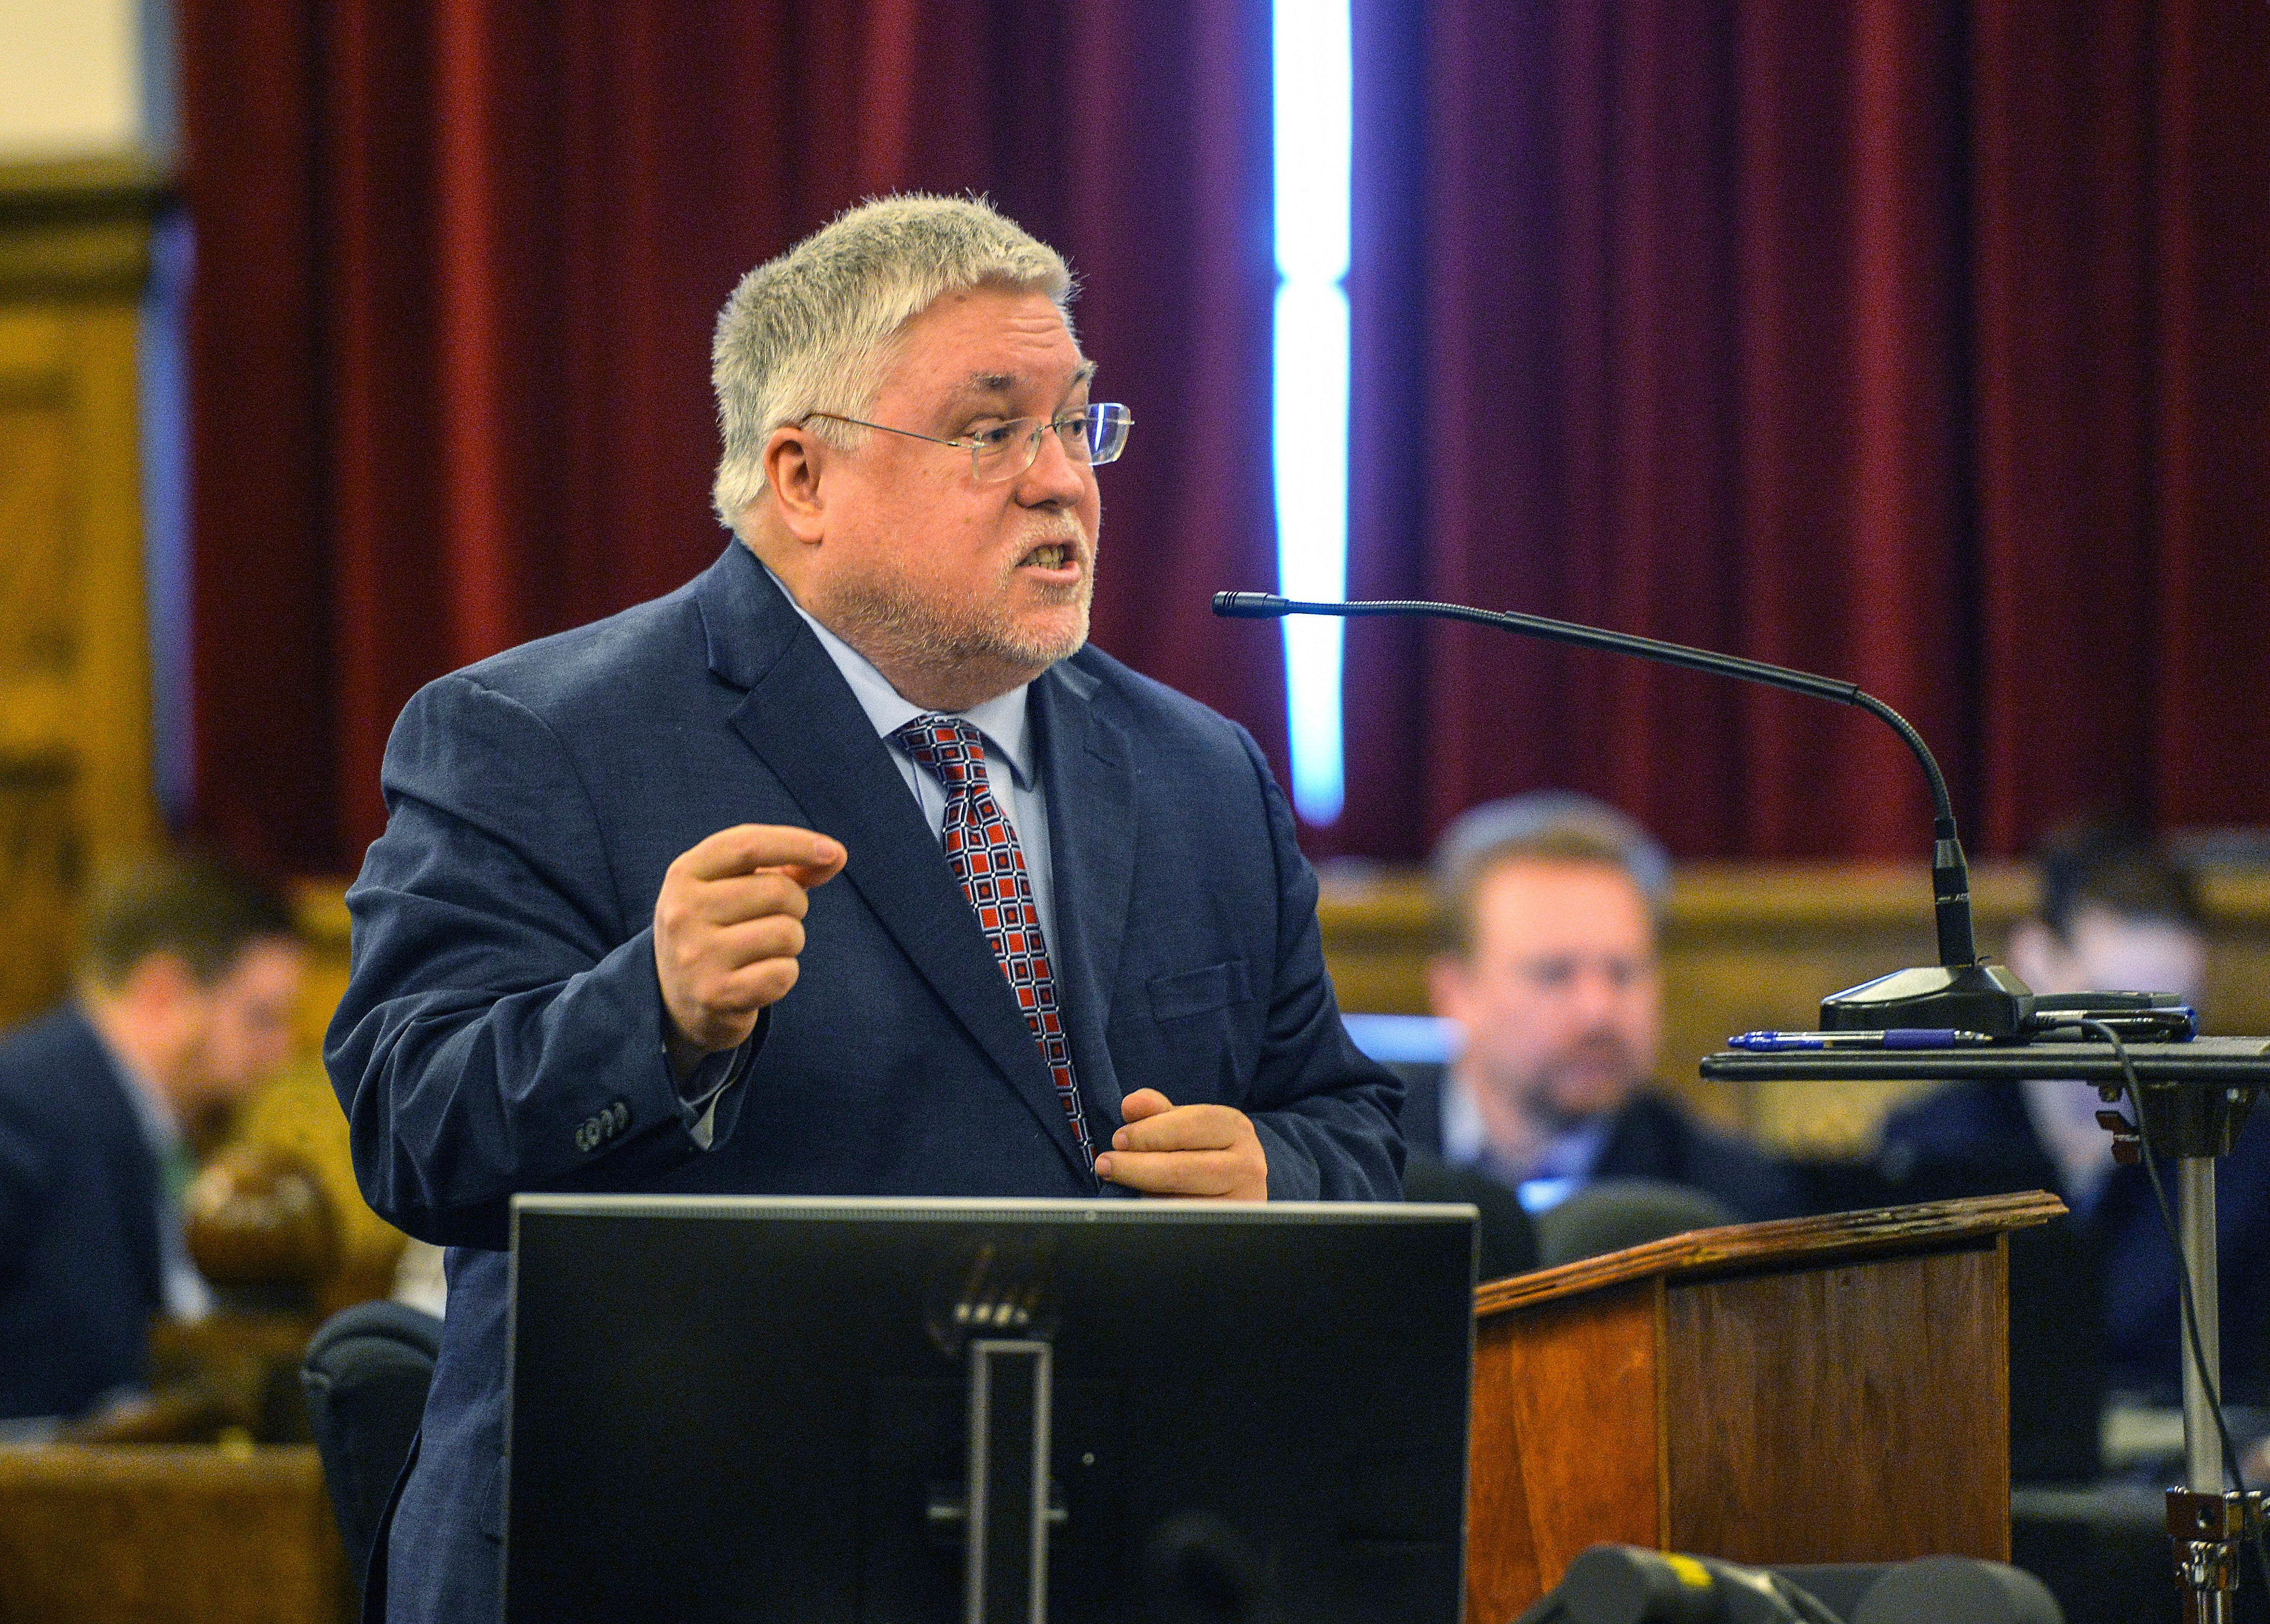 News :WV AG Patrick Morrisey asks for stay of ruling that blocked school voucher law